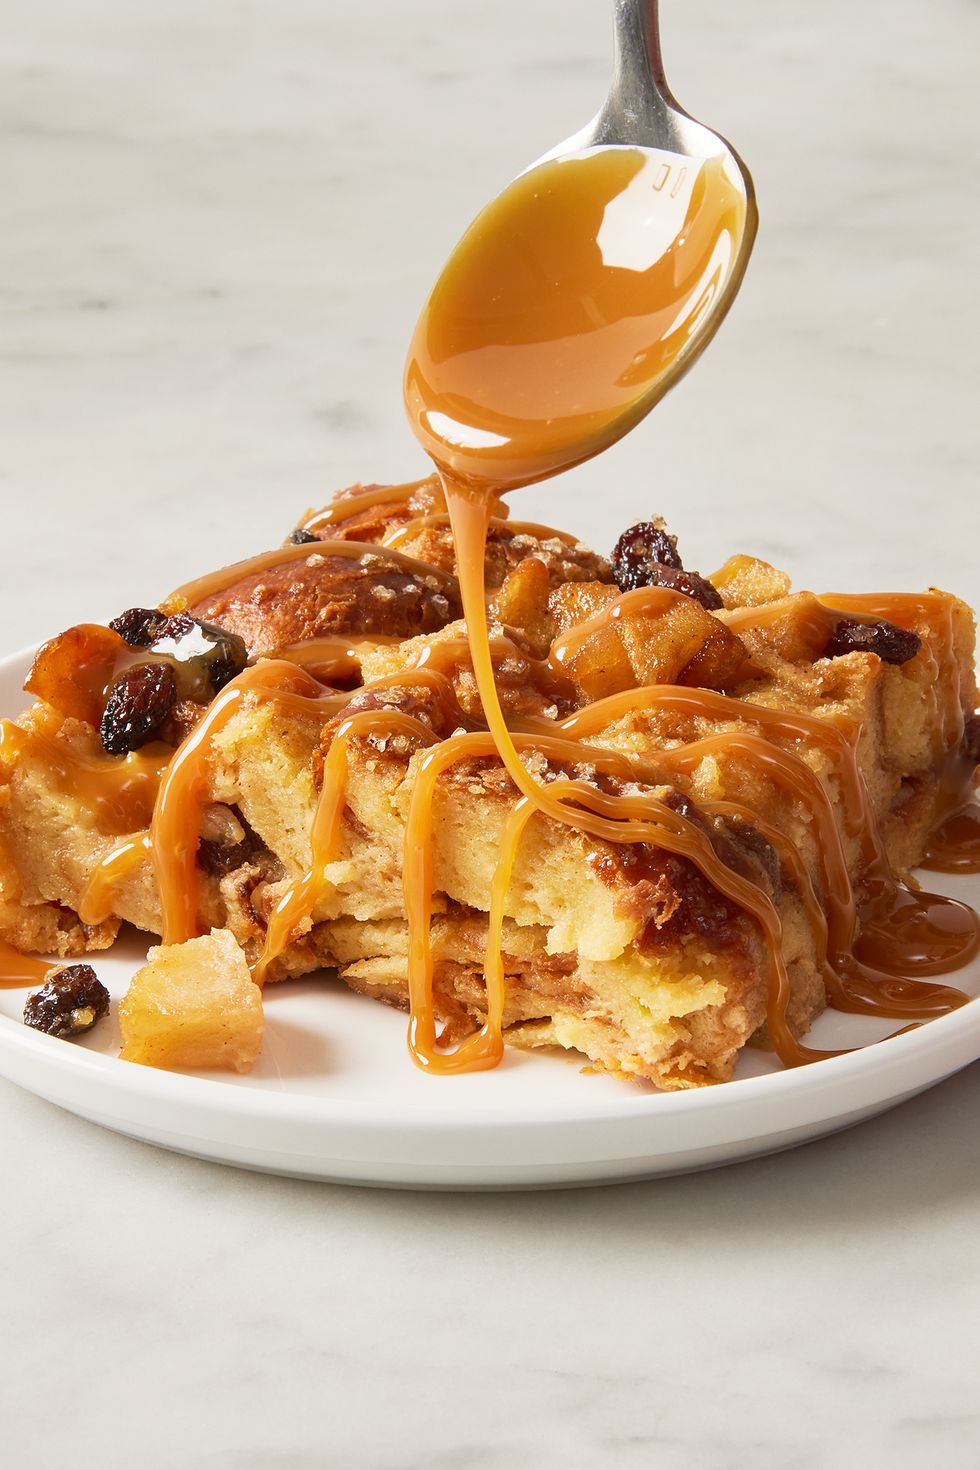 apple bread pudding on a plate drizzled with caramel sauce